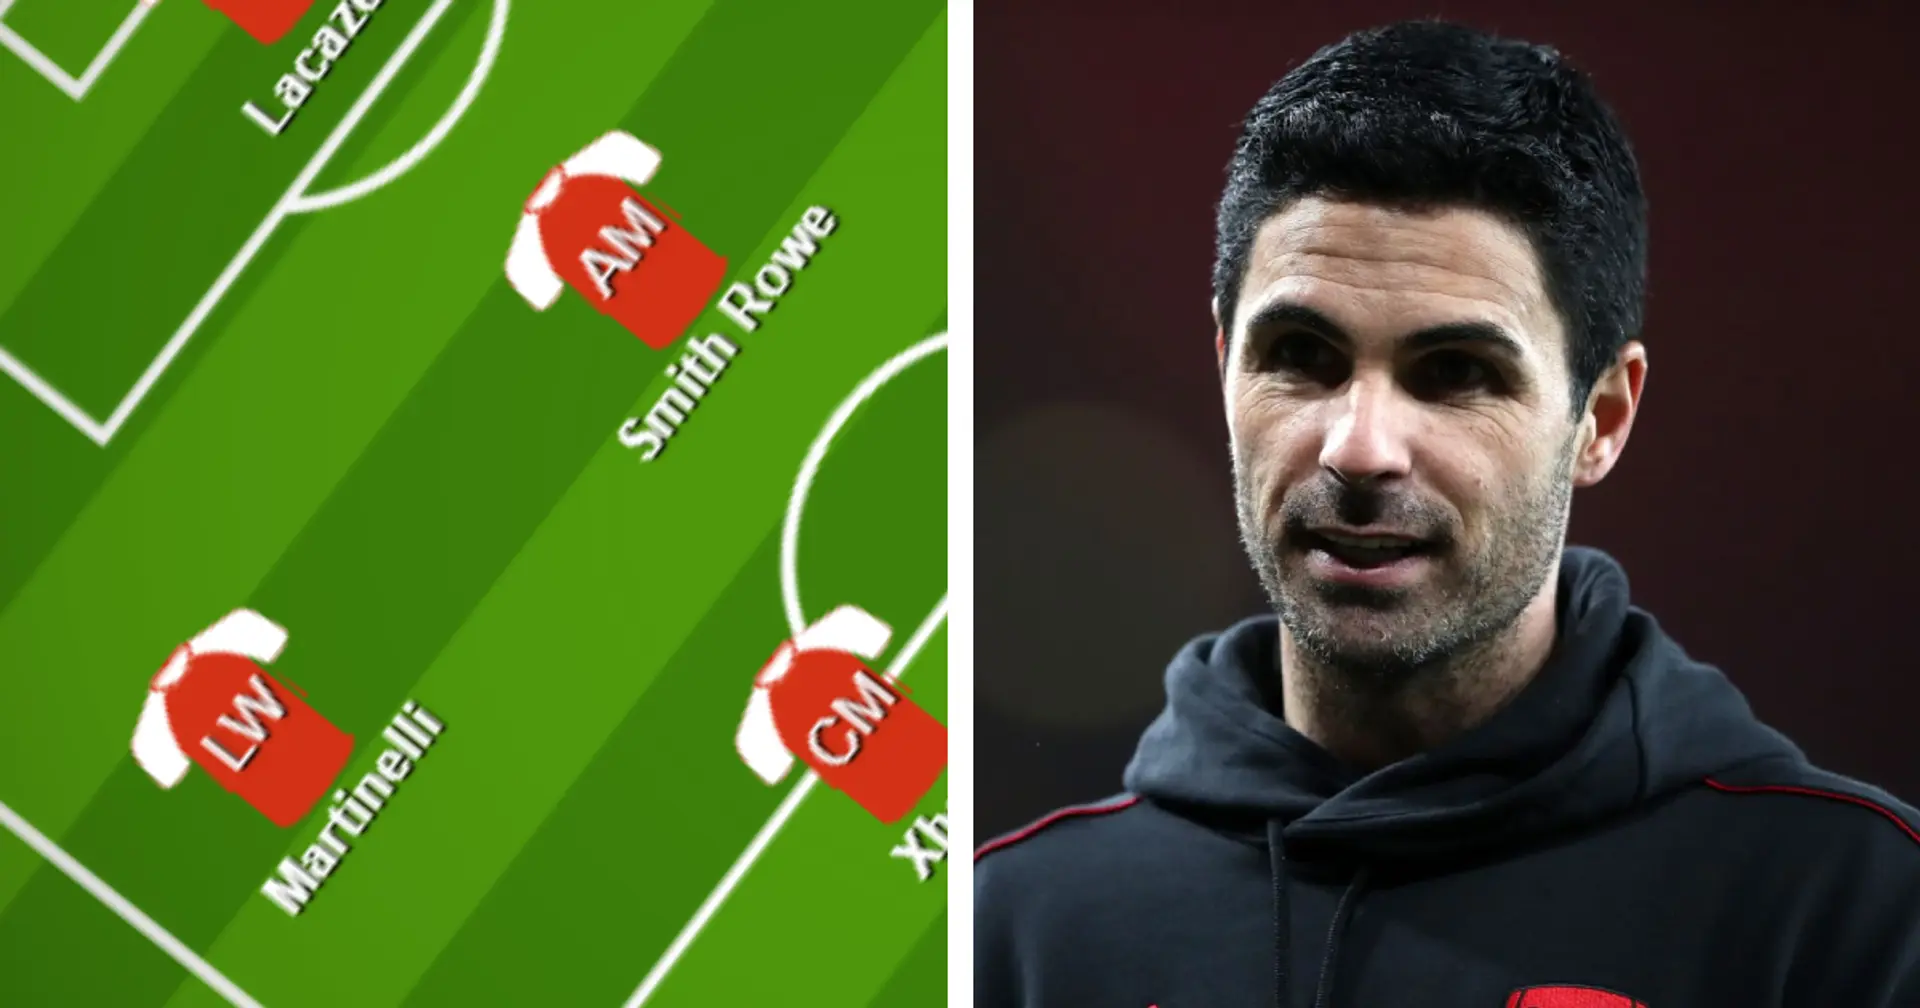 Arsenal vs Fulham: team news, probable line-ups, score predictions and more - preview